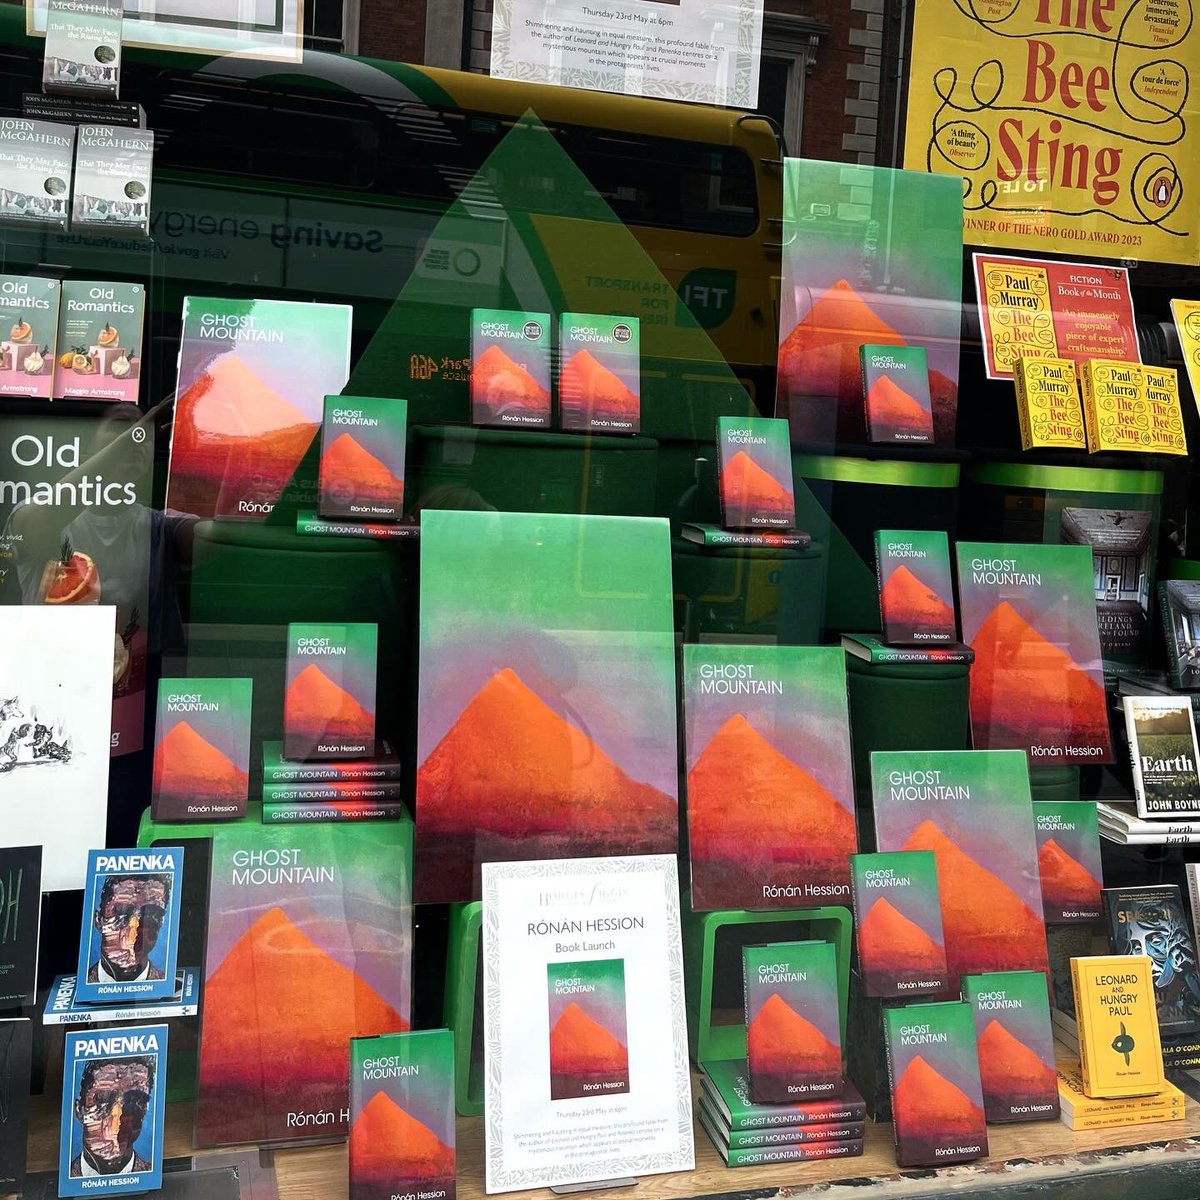 **BREAKING NEWS** Mysterious Mountain appears in window at Hodges Figgis! Many have made Pilgrimage to Ireland’s oldest bookstore for a glimpse at the phenomenon. Reports indicate a new book may hold some answers…what does Ghost Mountain mean to you?